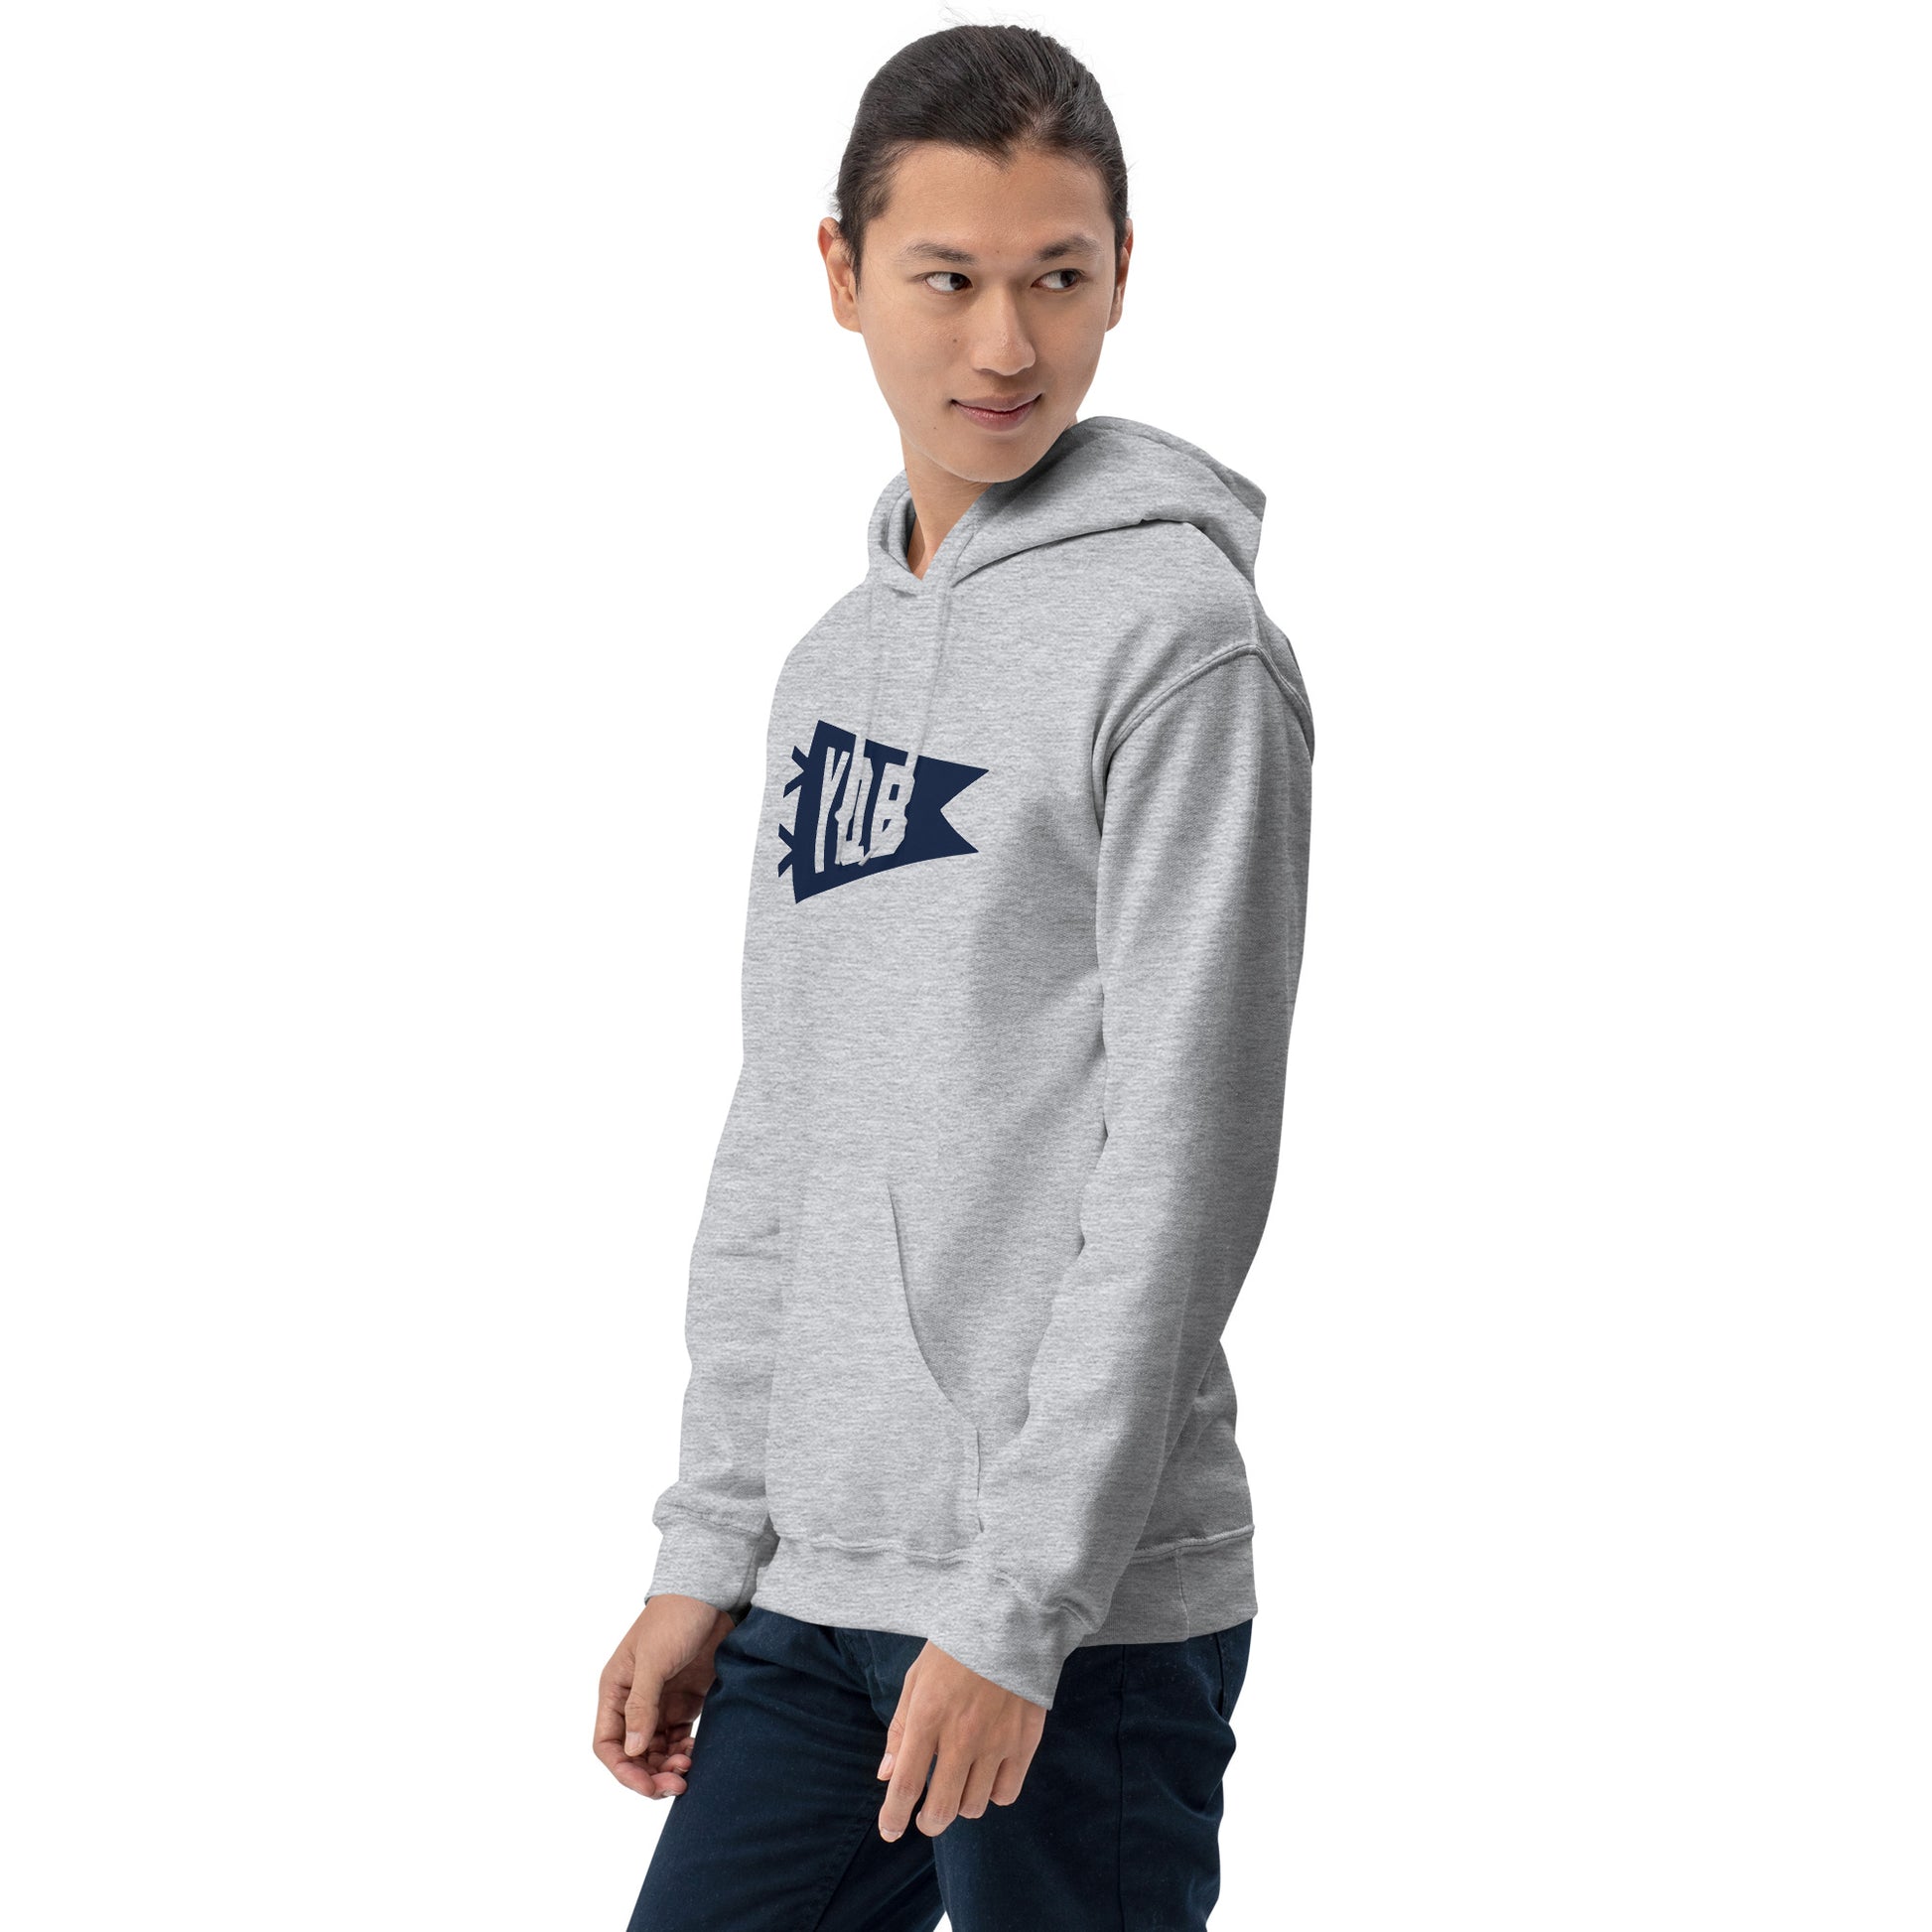 Airport Code Unisex Hoodie - Navy Blue Graphic • YQB Quebec City • YHM Designs - Image 10